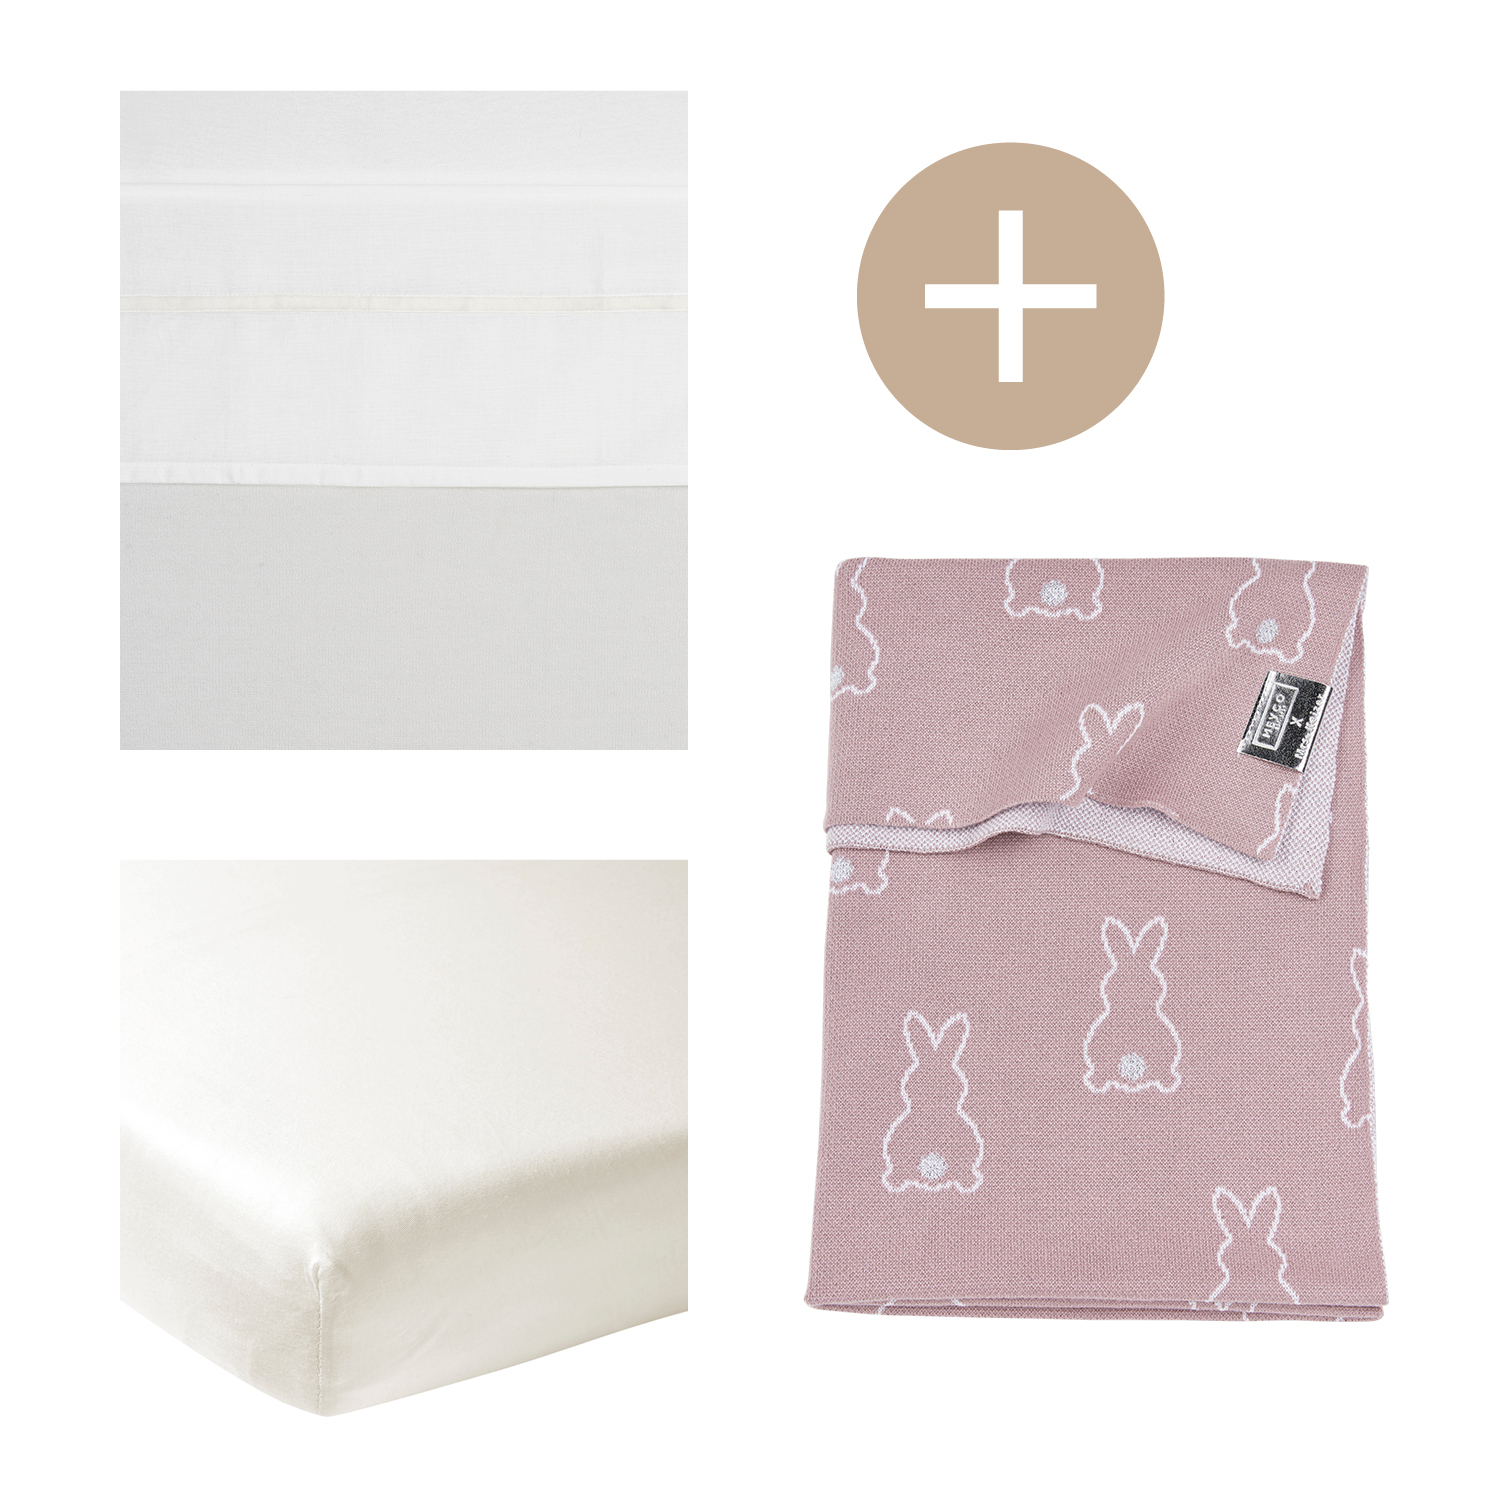 Cot bed blanket + cot bed sheet + fitted sheet cot bed Rabbit - lilac - 100x150cm